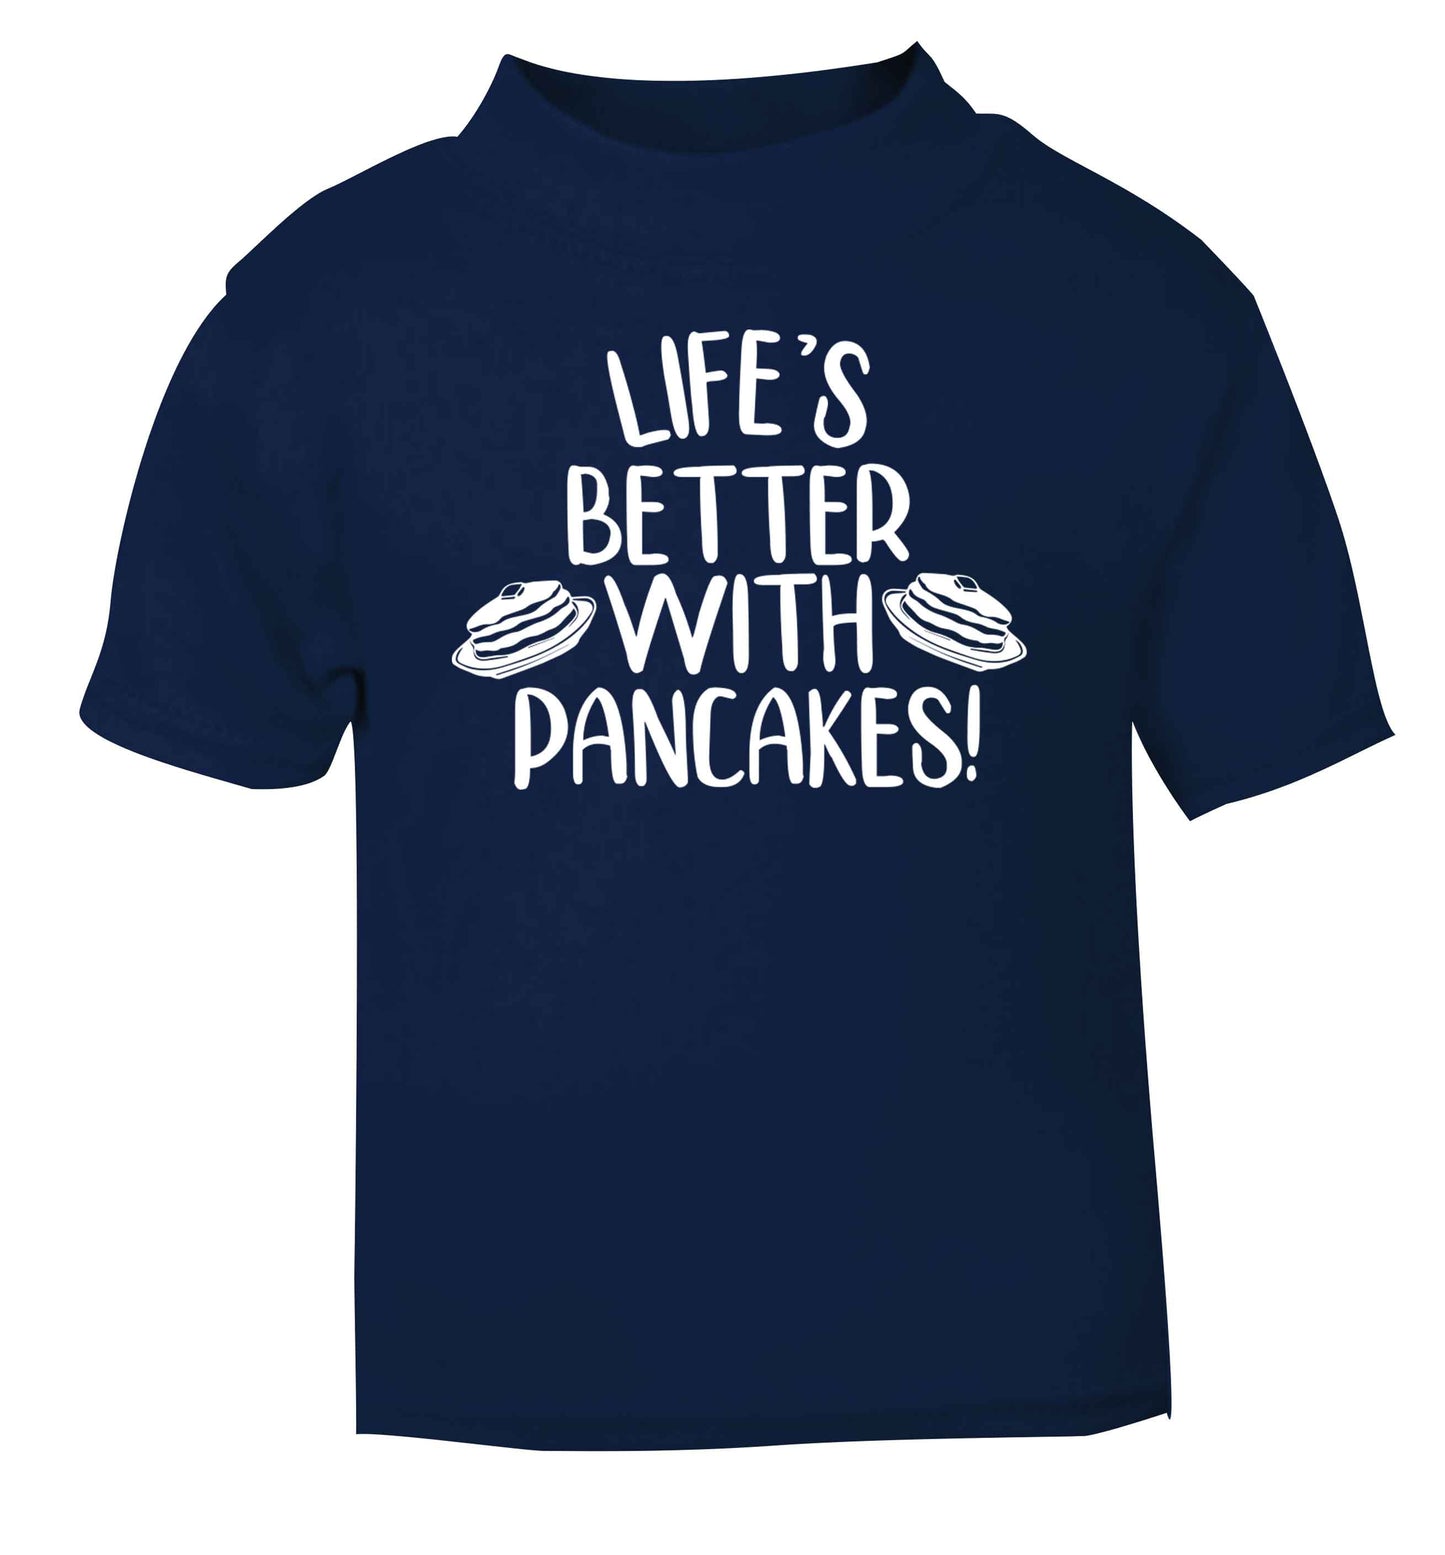 Life's better with pancakes navy baby toddler Tshirt 2 Years